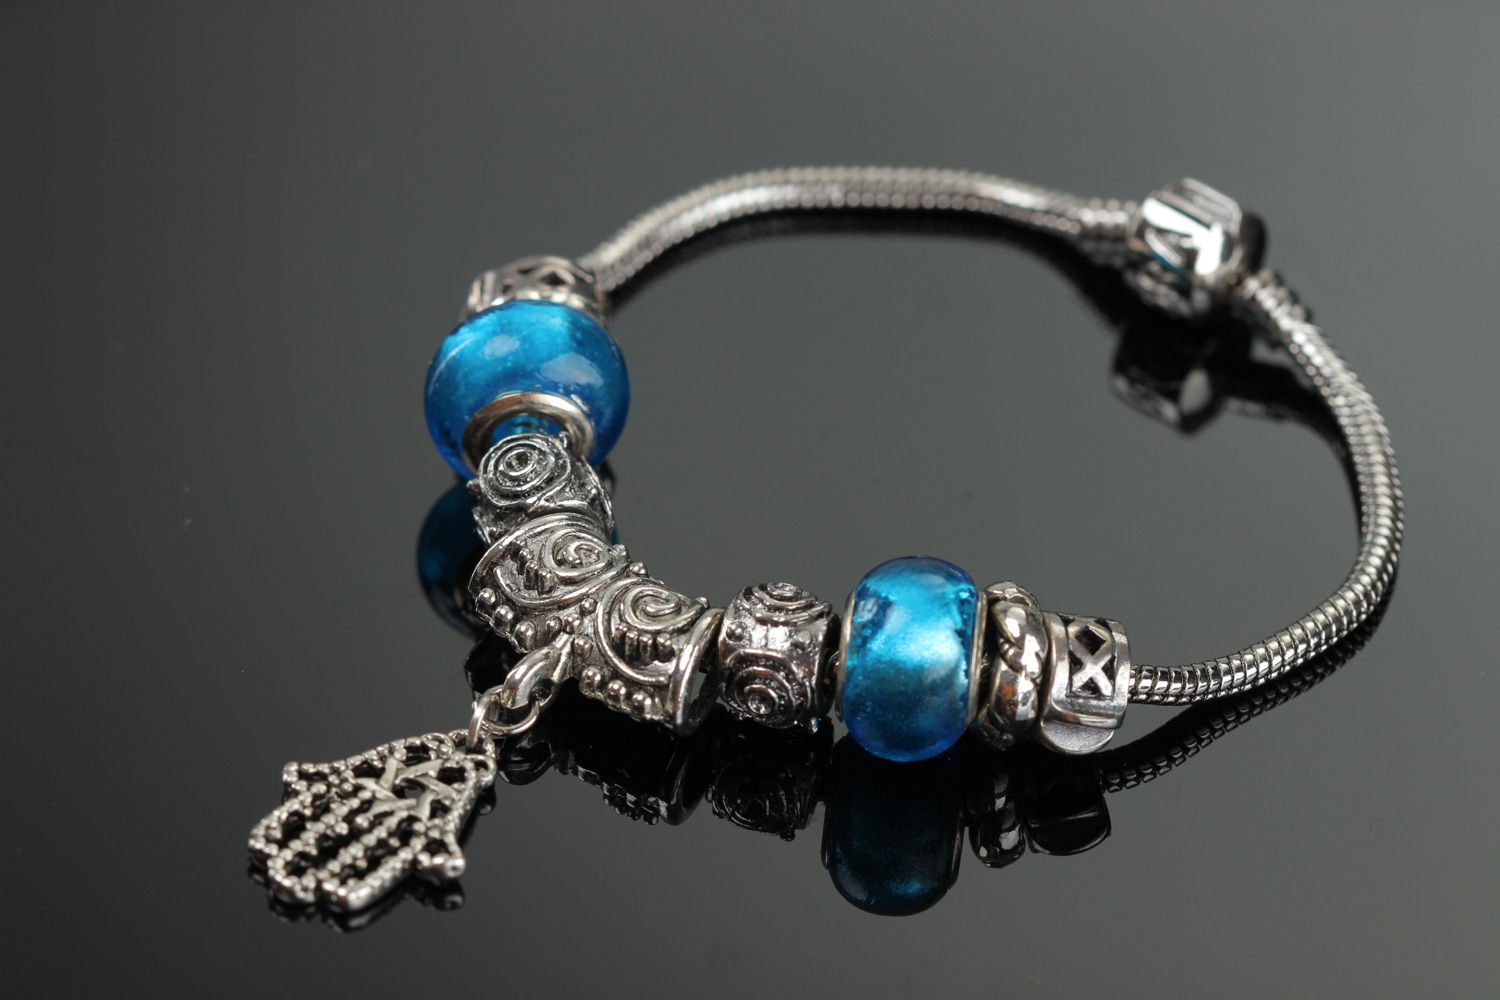 Thin handmade wrist bracelet with blue glass beads and metal charm for women photo 1